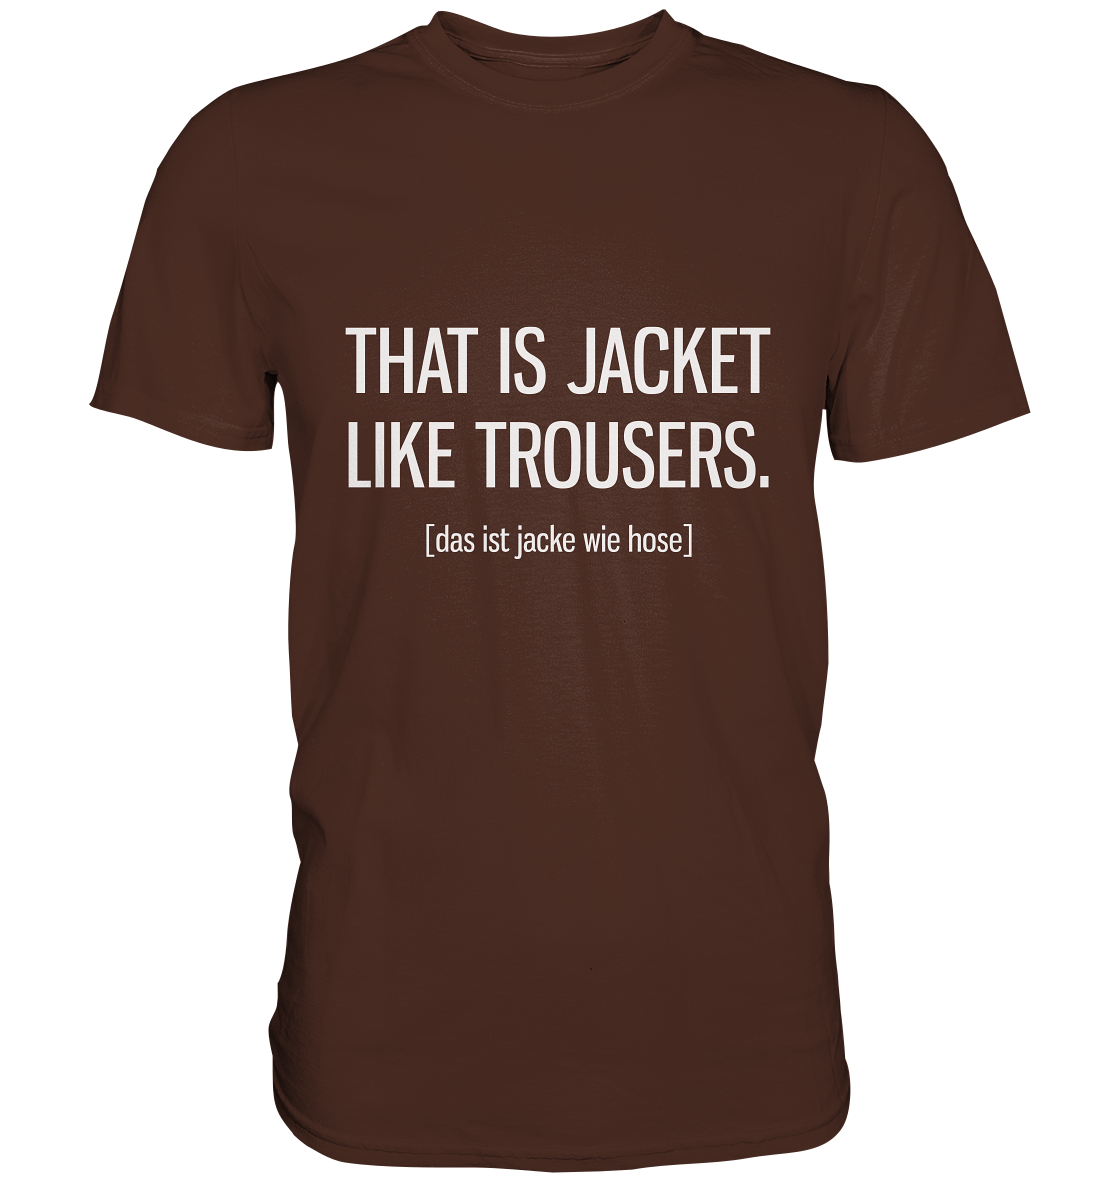 That is jacket like trousers. Englisch - Unisex Premium Shirt